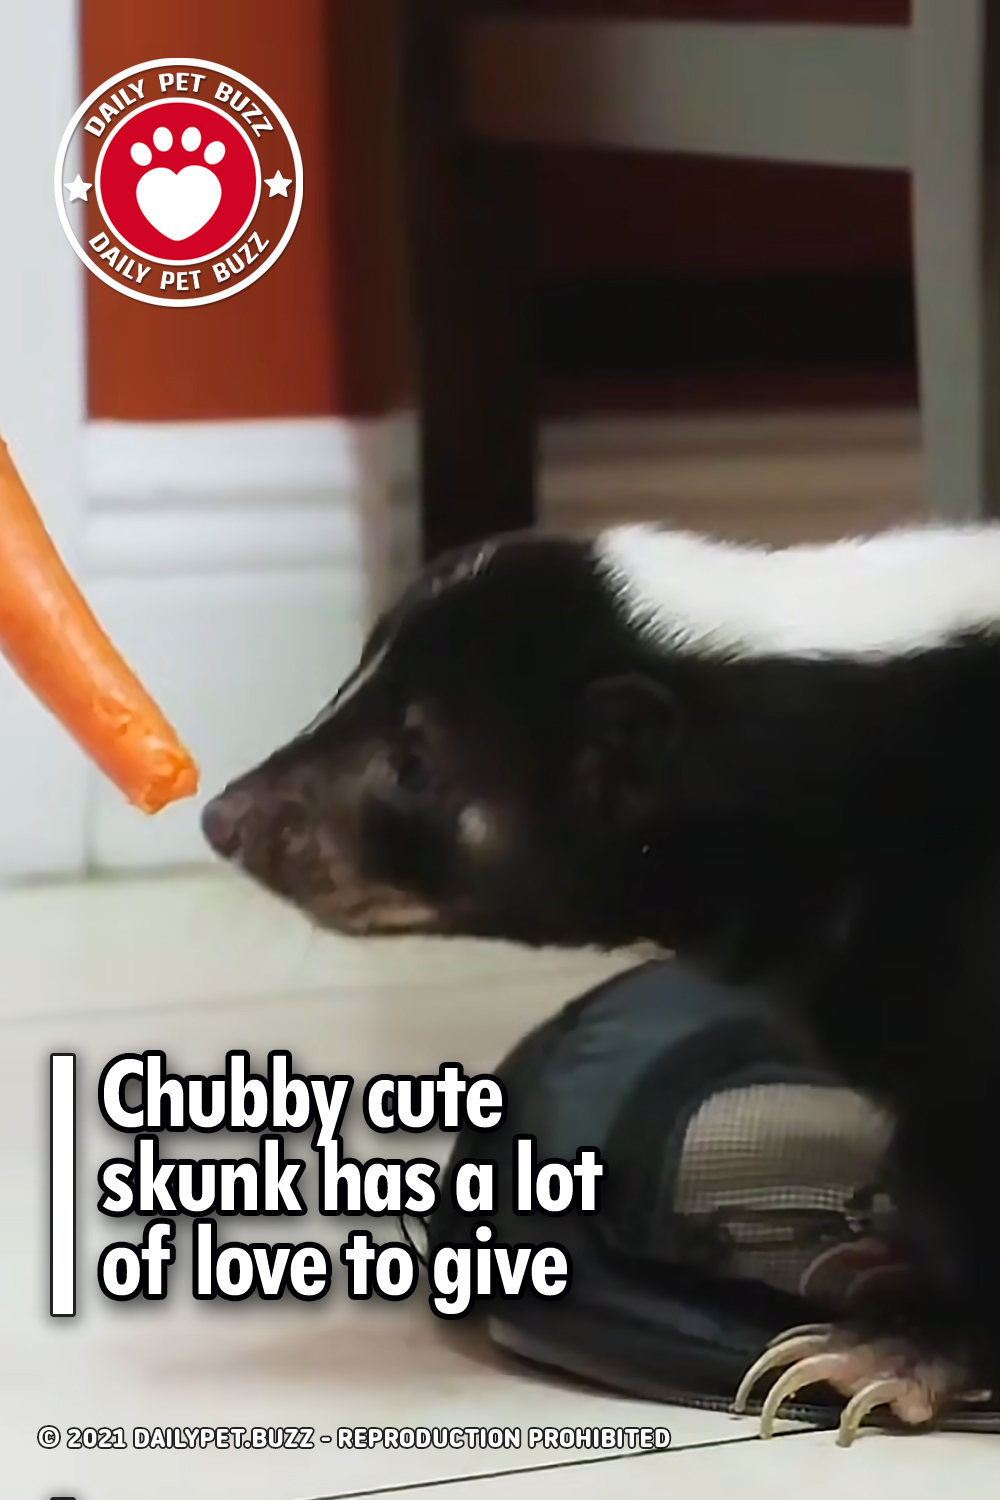 Chubby cute skunk has a lot of love to give